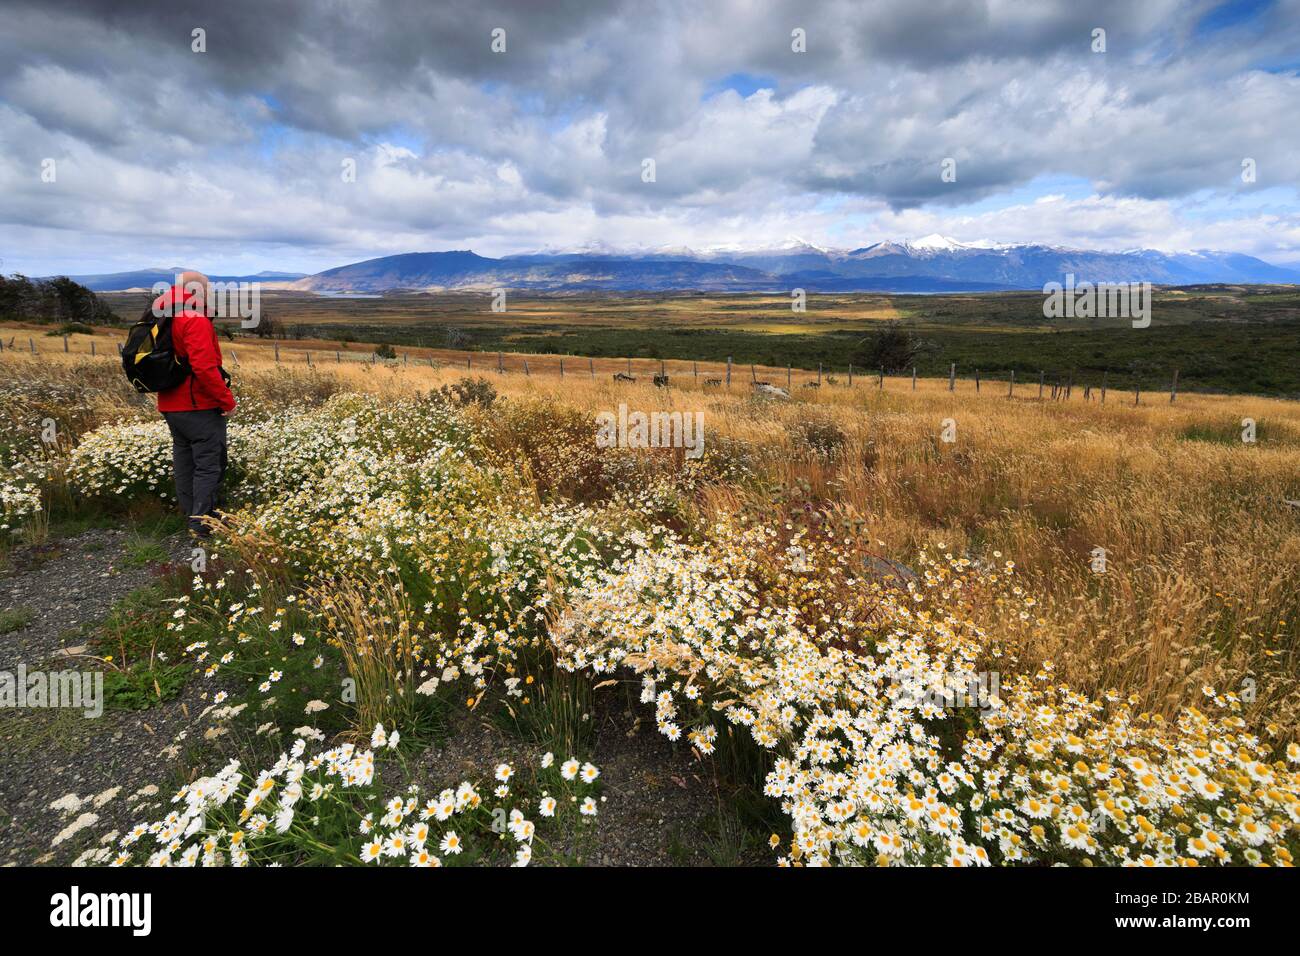 Wild flower meadow in Torres de Paine national park, Patagonia Steppe, Patagonia, Chile, South America Stock Photo